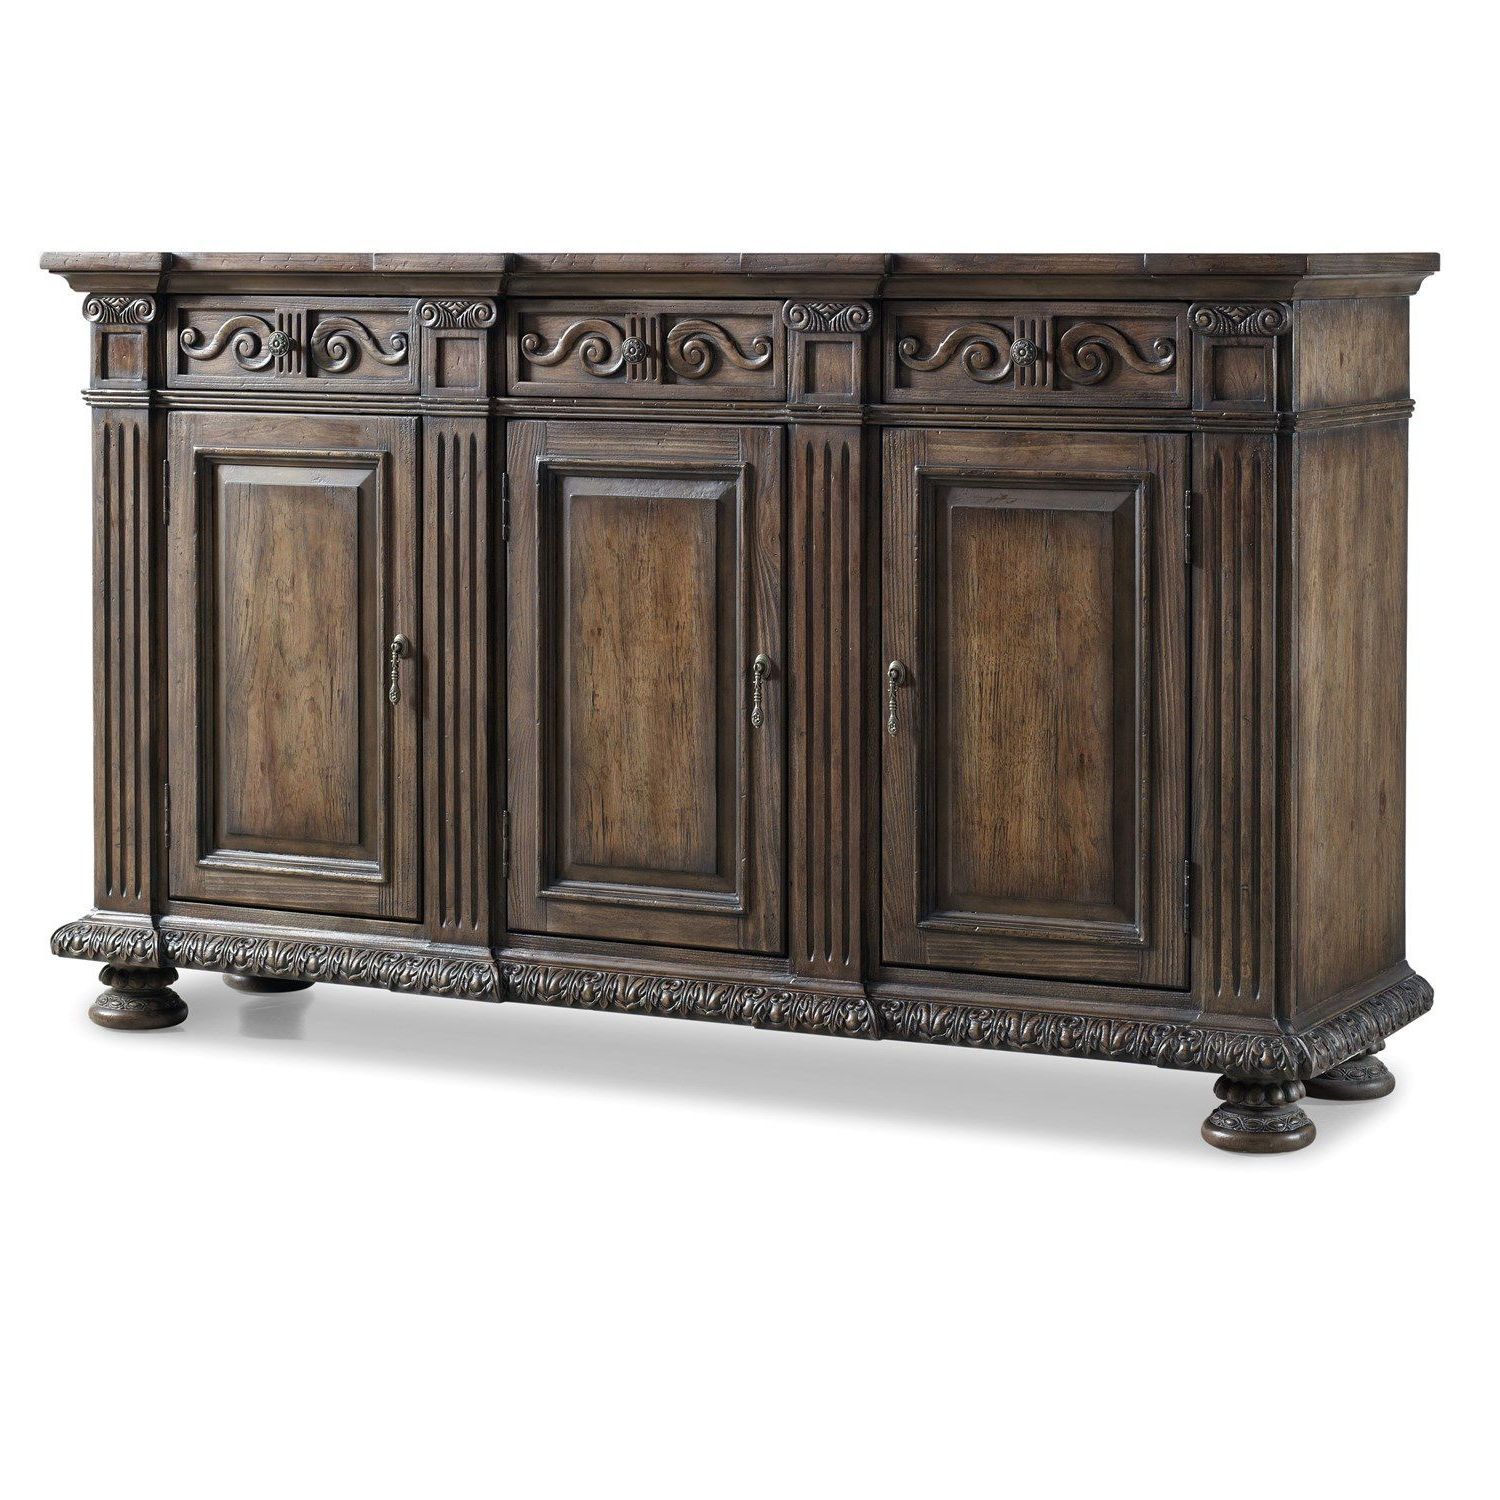 Hooker Furniture 5070 85001 Rhapsody 72" Credenza | Hooker Throughout Chalus Sideboards (View 6 of 20)